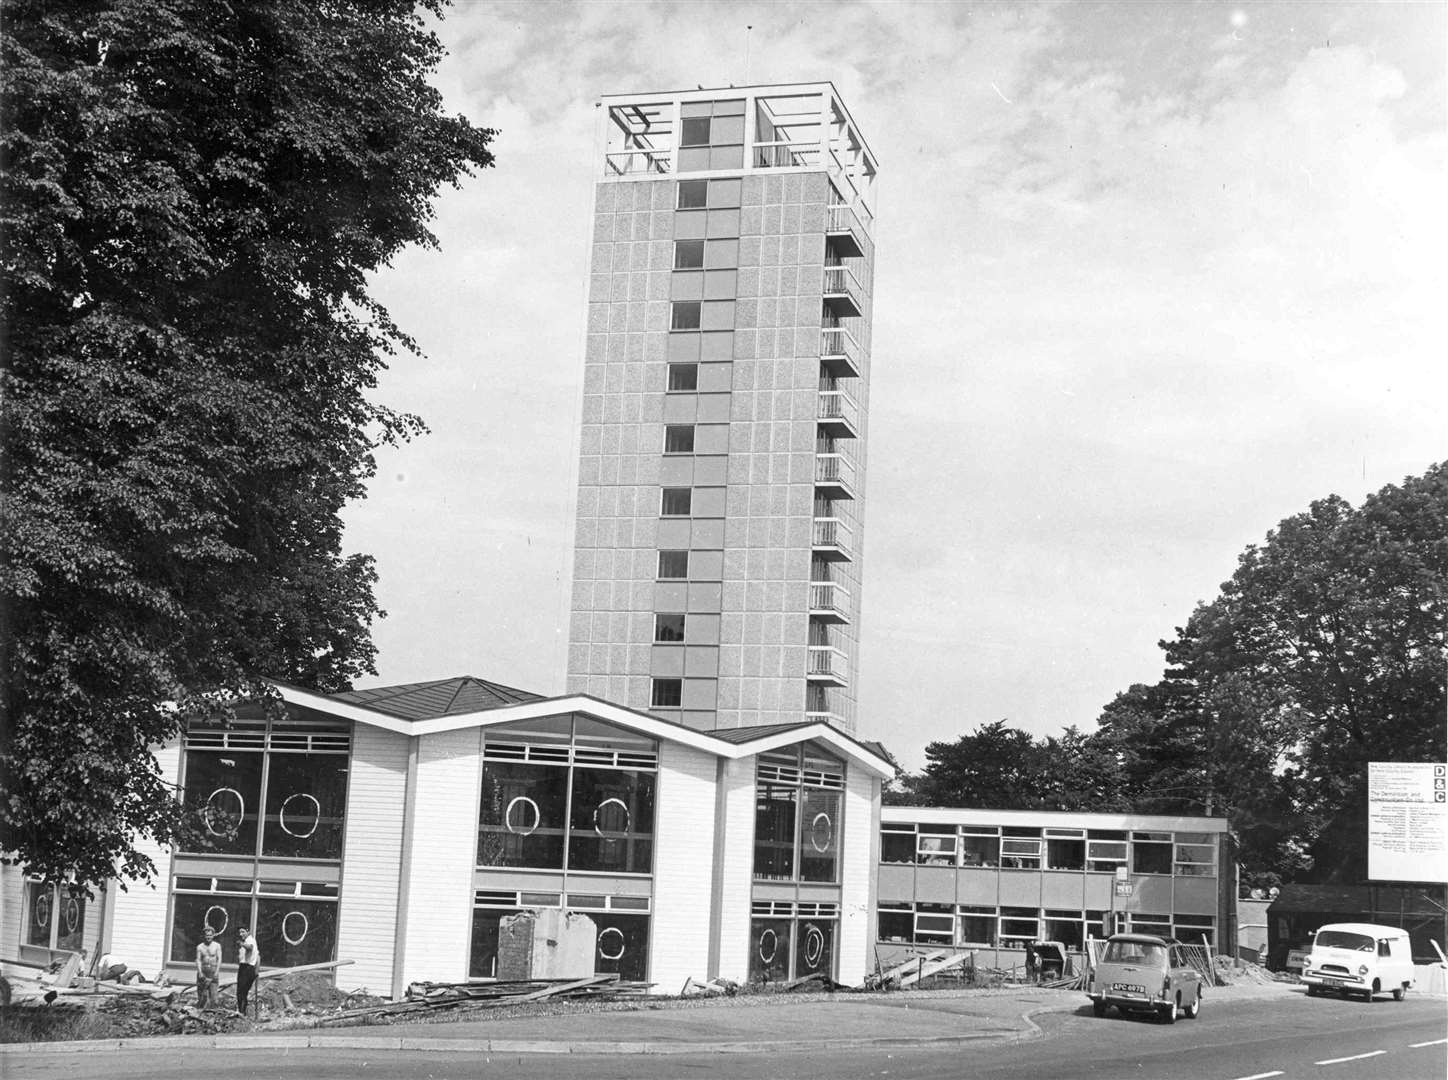 The new 13-storey County Library at Springfield, Maidstone, pictured in July 1964